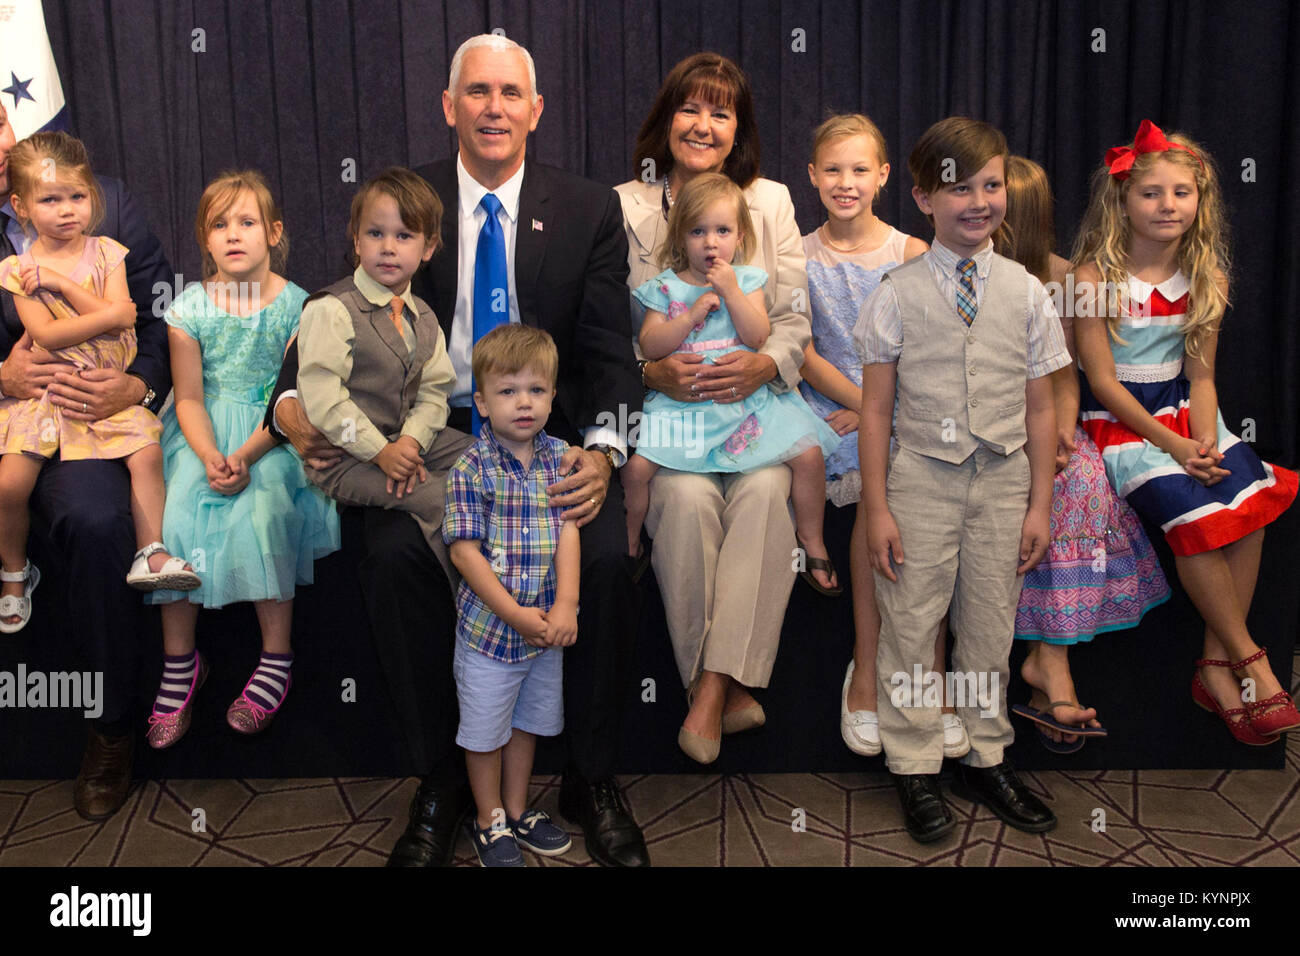 Vice President Mike Pence Mrs Karen Pence And Families Of The Stock Photo Alamy https www alamy com stock photo vice president mike pence mrs karen pence and families of the united 171967794 html